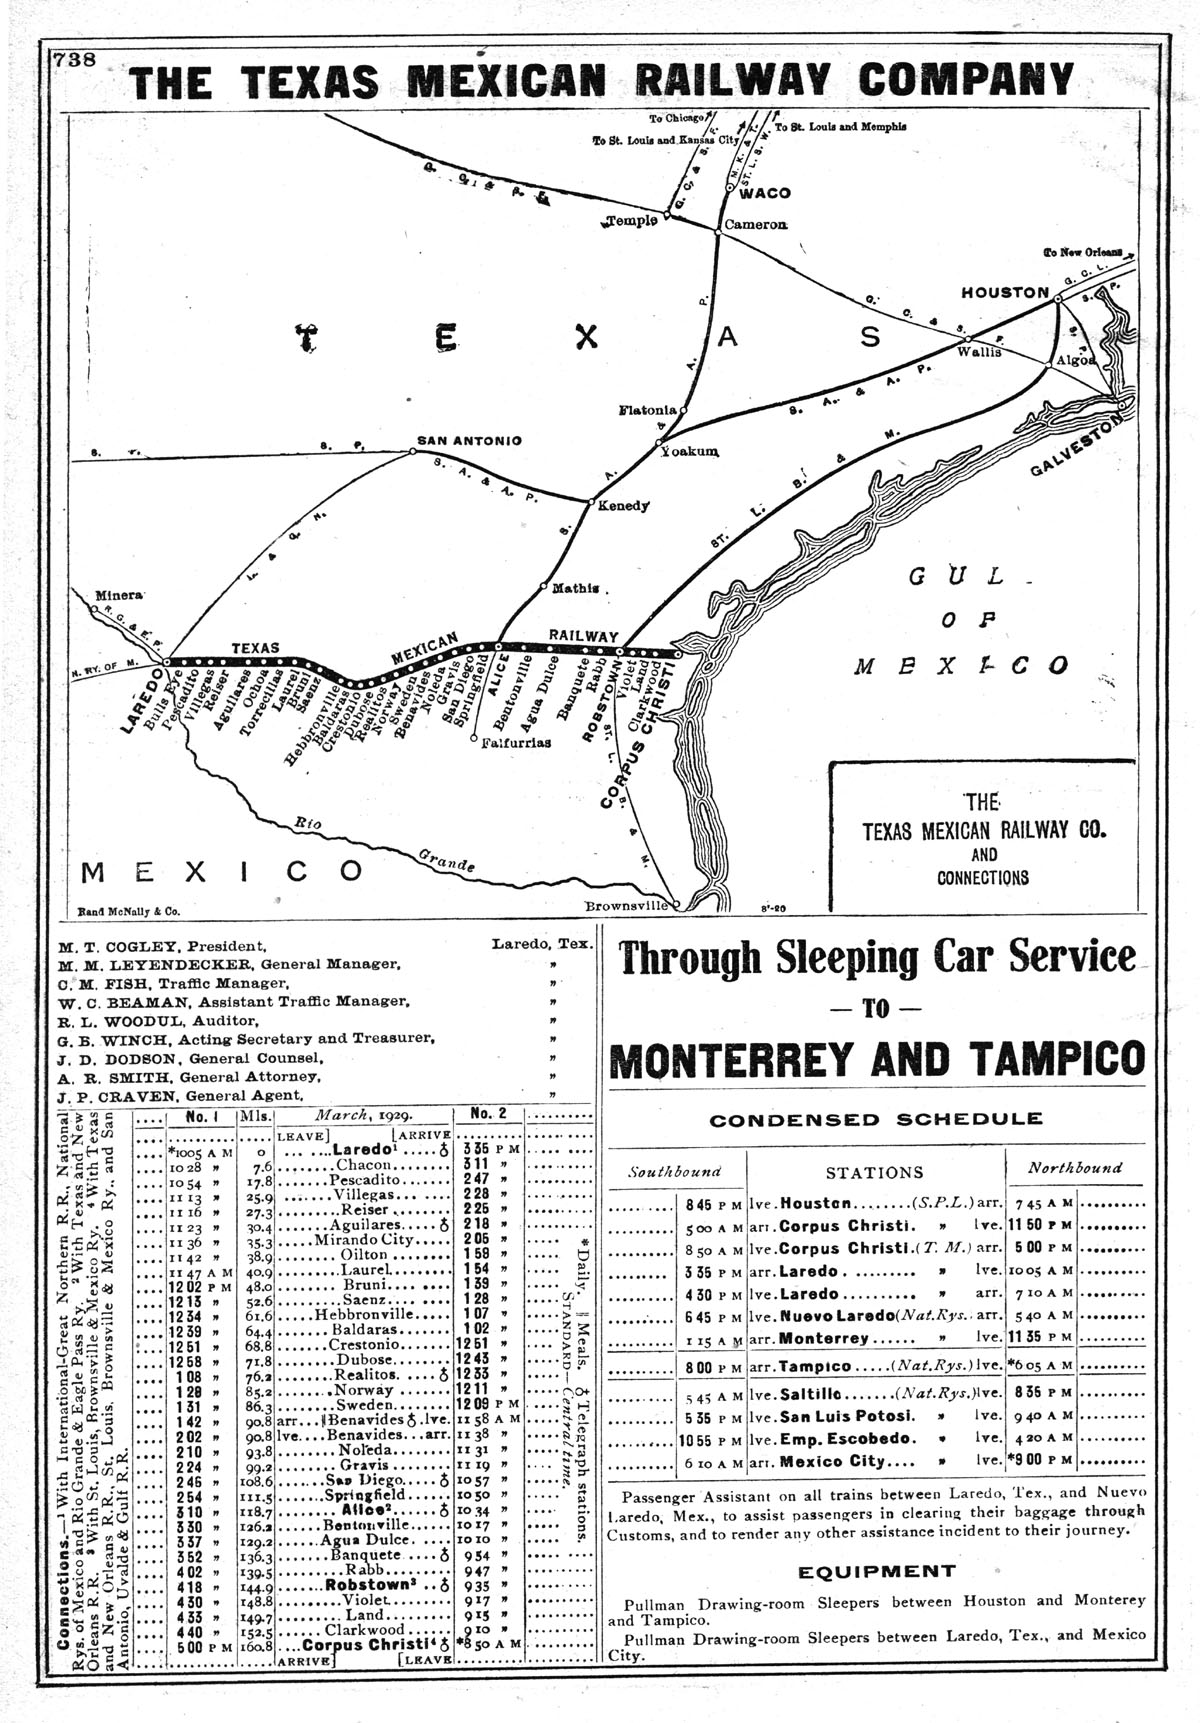 Texas-Mexican Railway Company (Tex.), Public Timetable Map Showing Route in 1929.